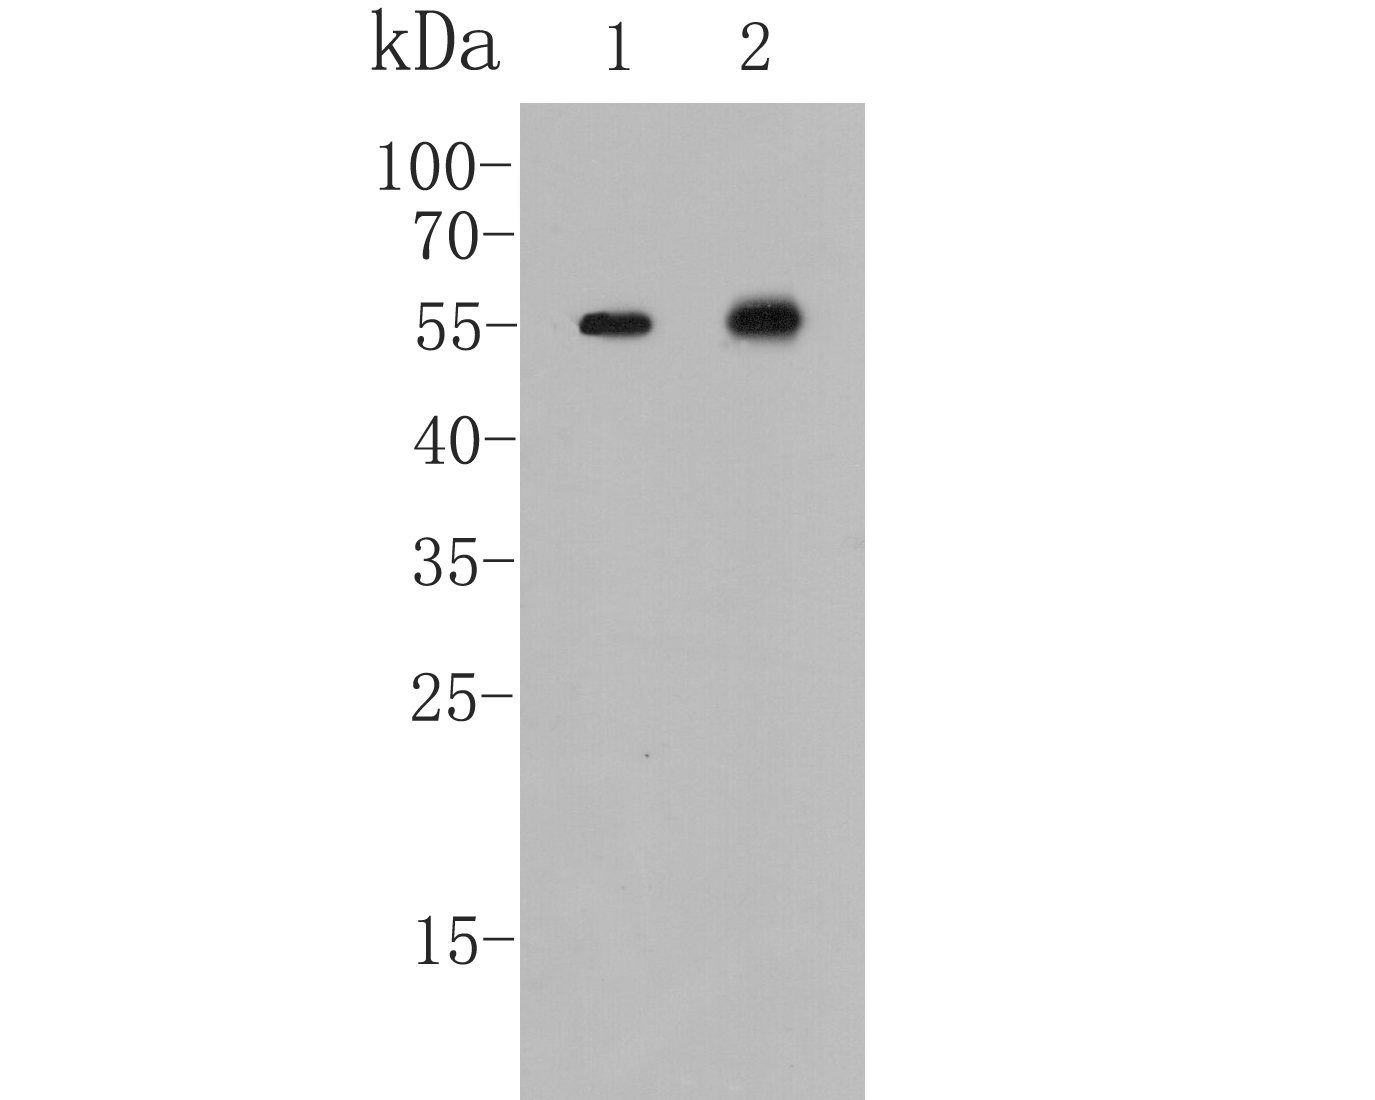 Western blot analysis of ICAD on different lysates. Proteins were transferred to a PVDF membrane and blocked with 5% BSA in PBS for 1 hour at room temperature. The primary antibody (ET7109-91, 1/500) was used in 5% BSA at room temperature for 2 hours. Goat Anti-Rabbit IgG - HRP Secondary Antibody (HA1001) at 1:5,000 dilution was used for 1 hour at room temperature.<br />
Positive control: <br />
Lane 1: Jurkat cell lysate <br />
Lane 2: Human stomach tissue lysate<br />
<br />
Predicted band size: 37 kDa<br />
Observed band size: 55 kDa